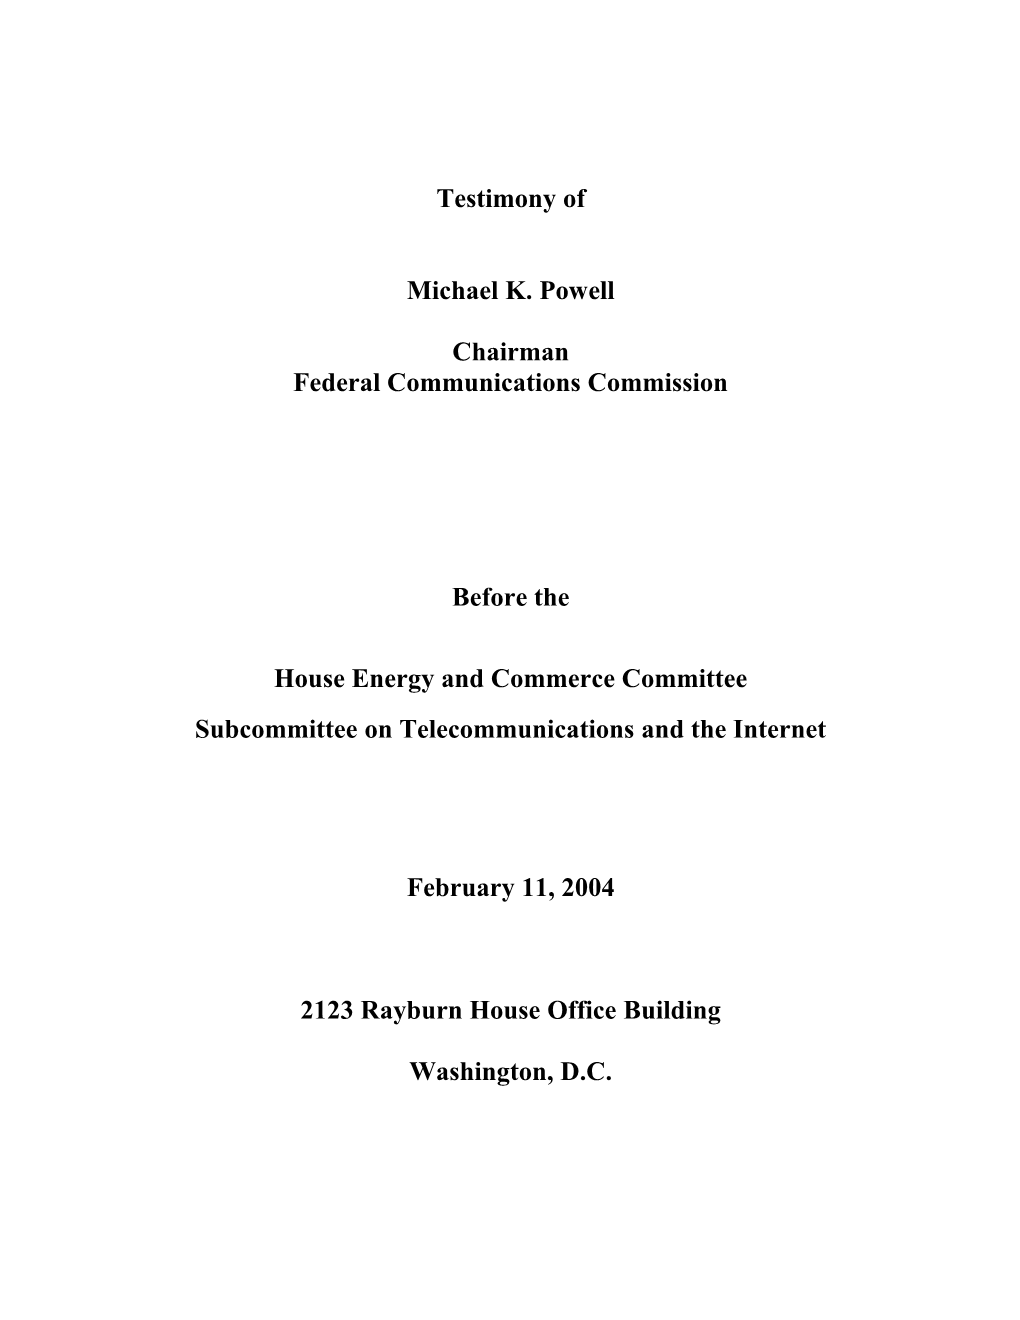 House Energy and Commerce Committee